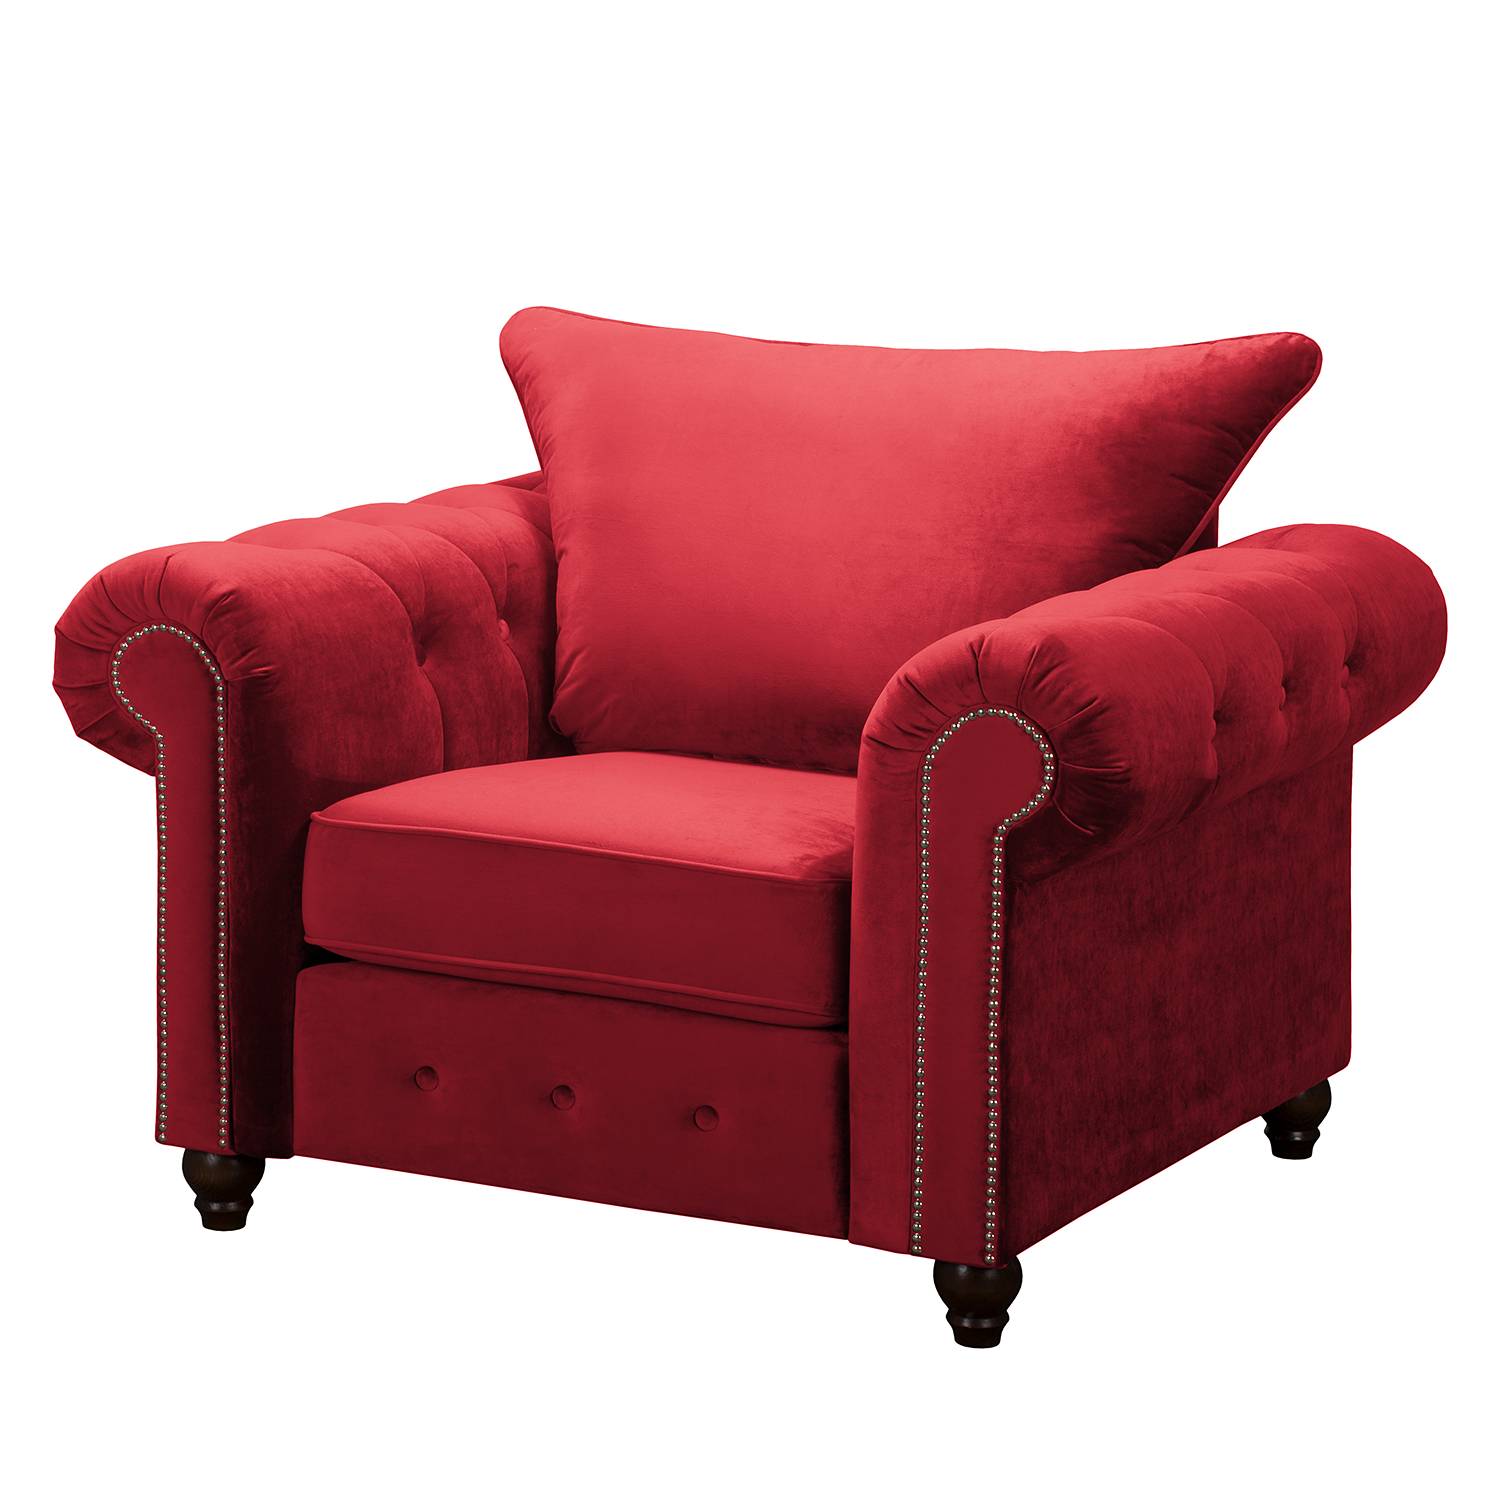 Image of Fauteuil Solita 000000001000135643